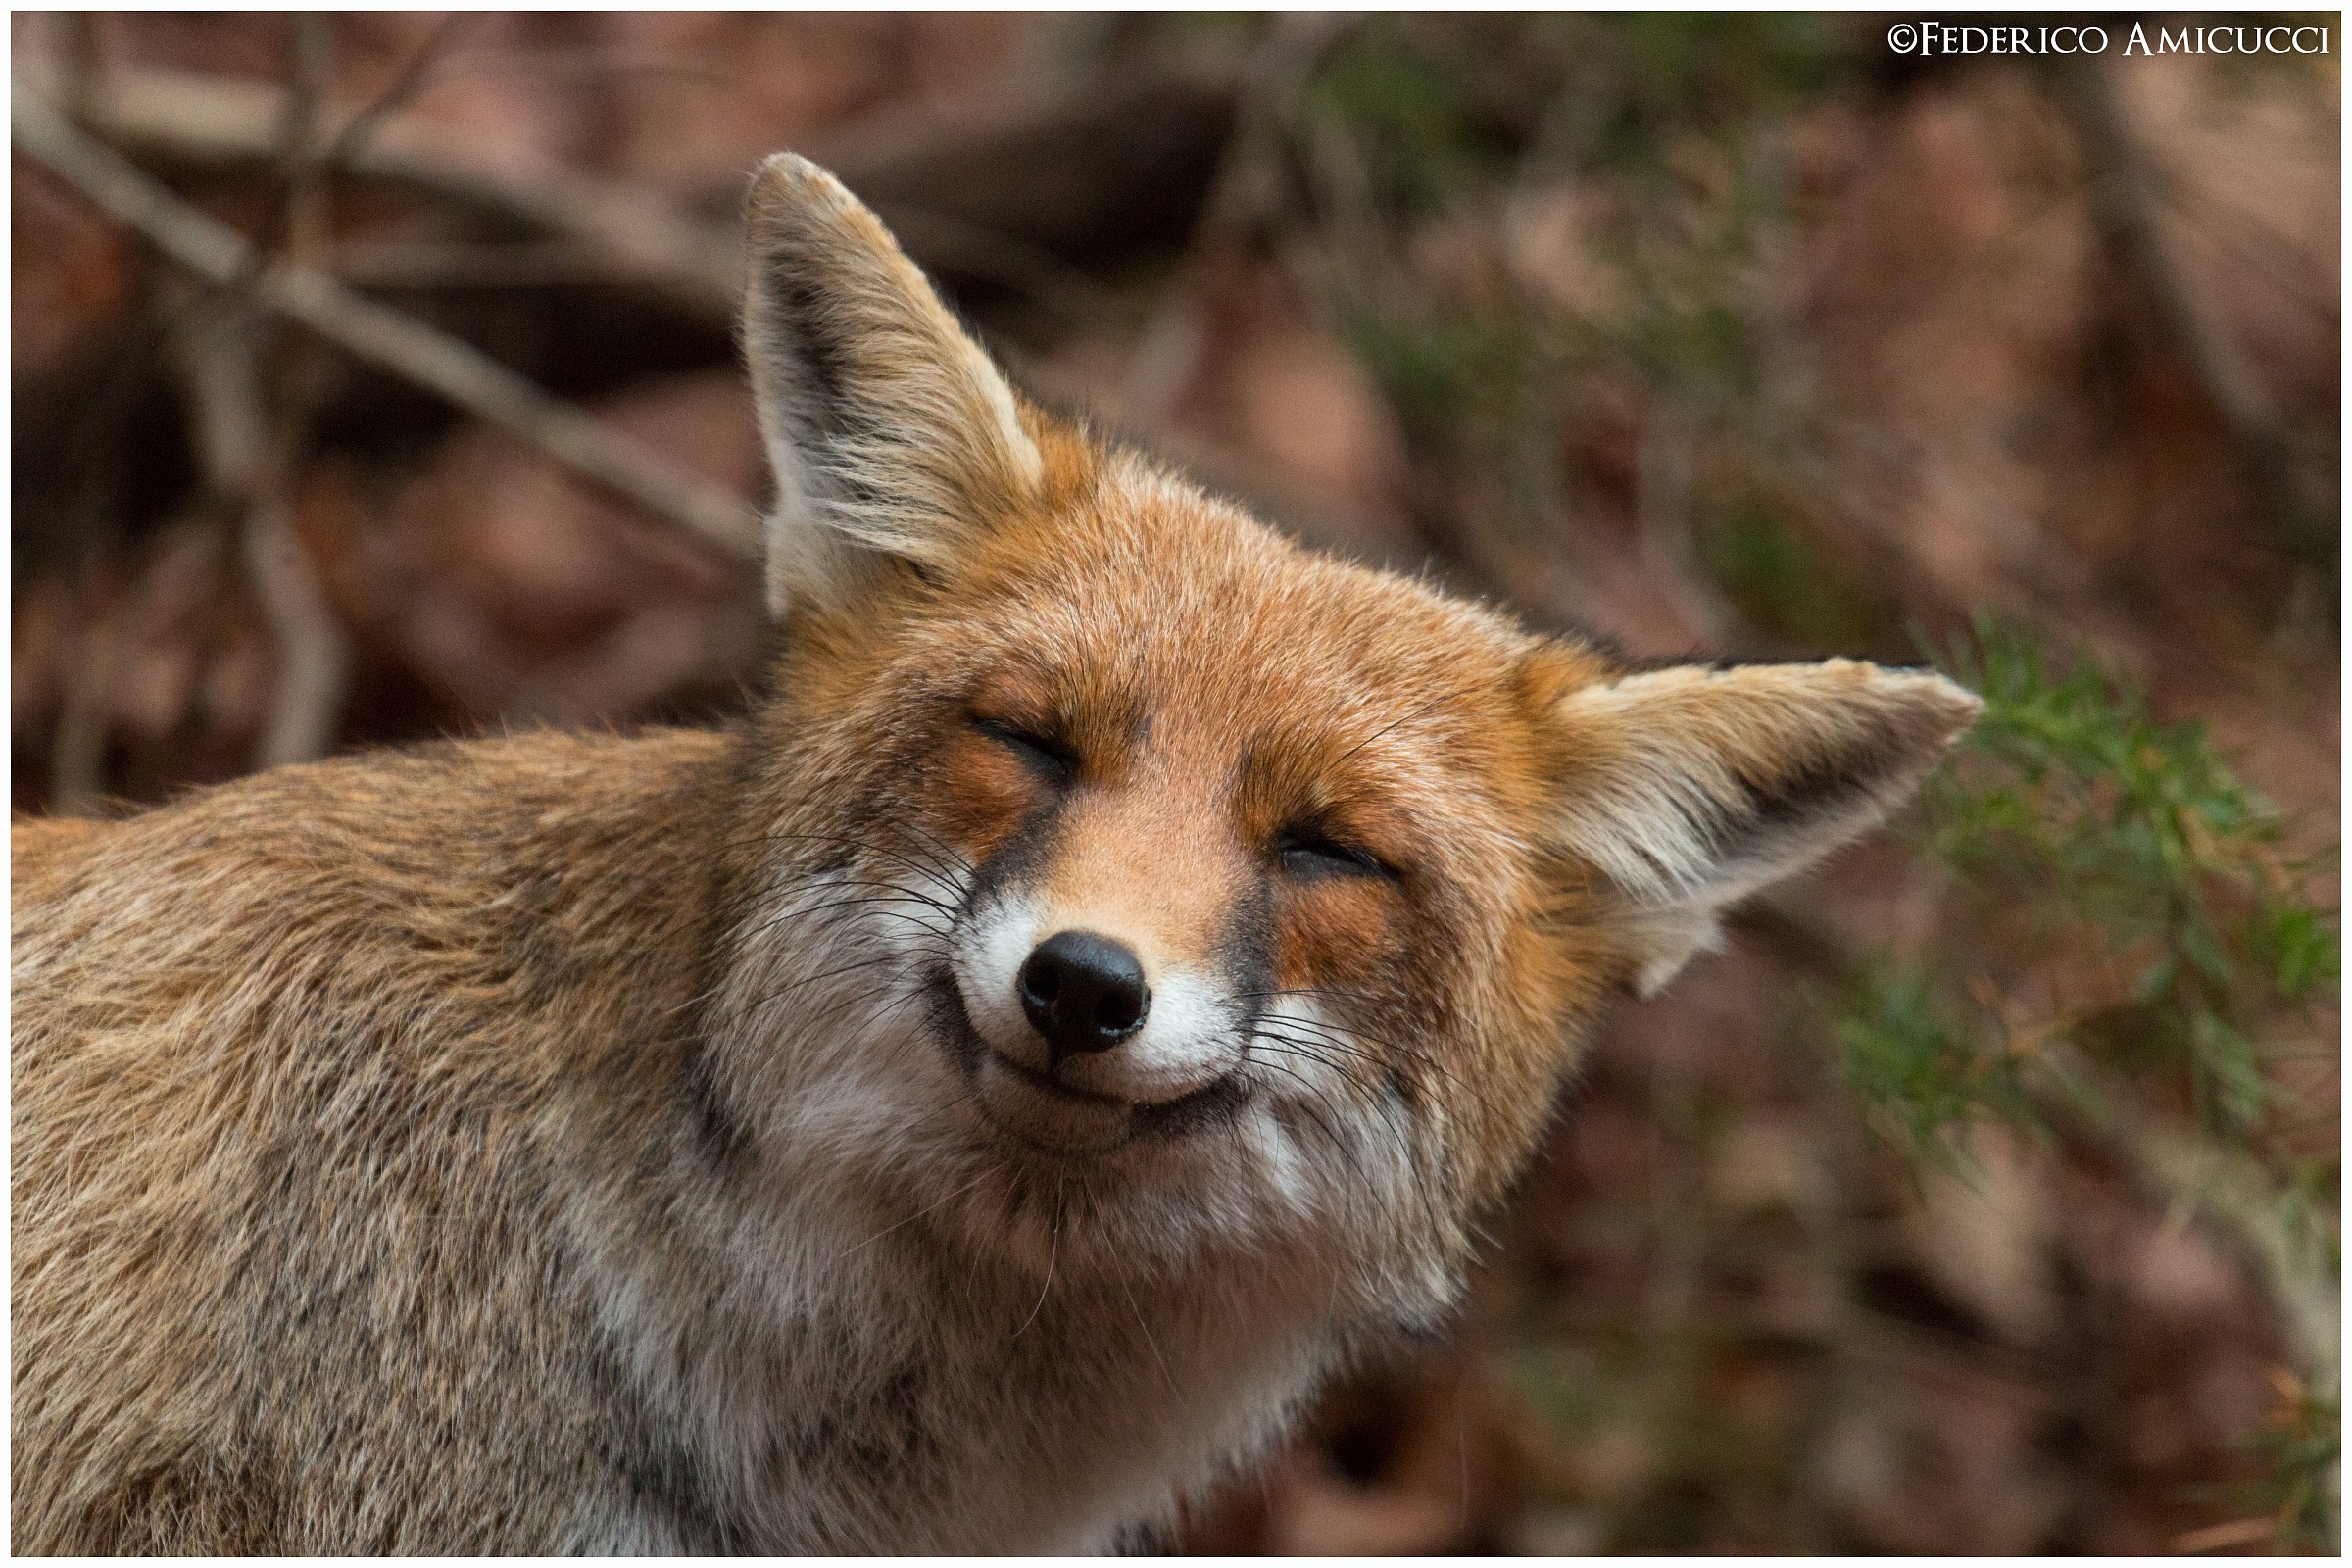 The smile of the Fox...